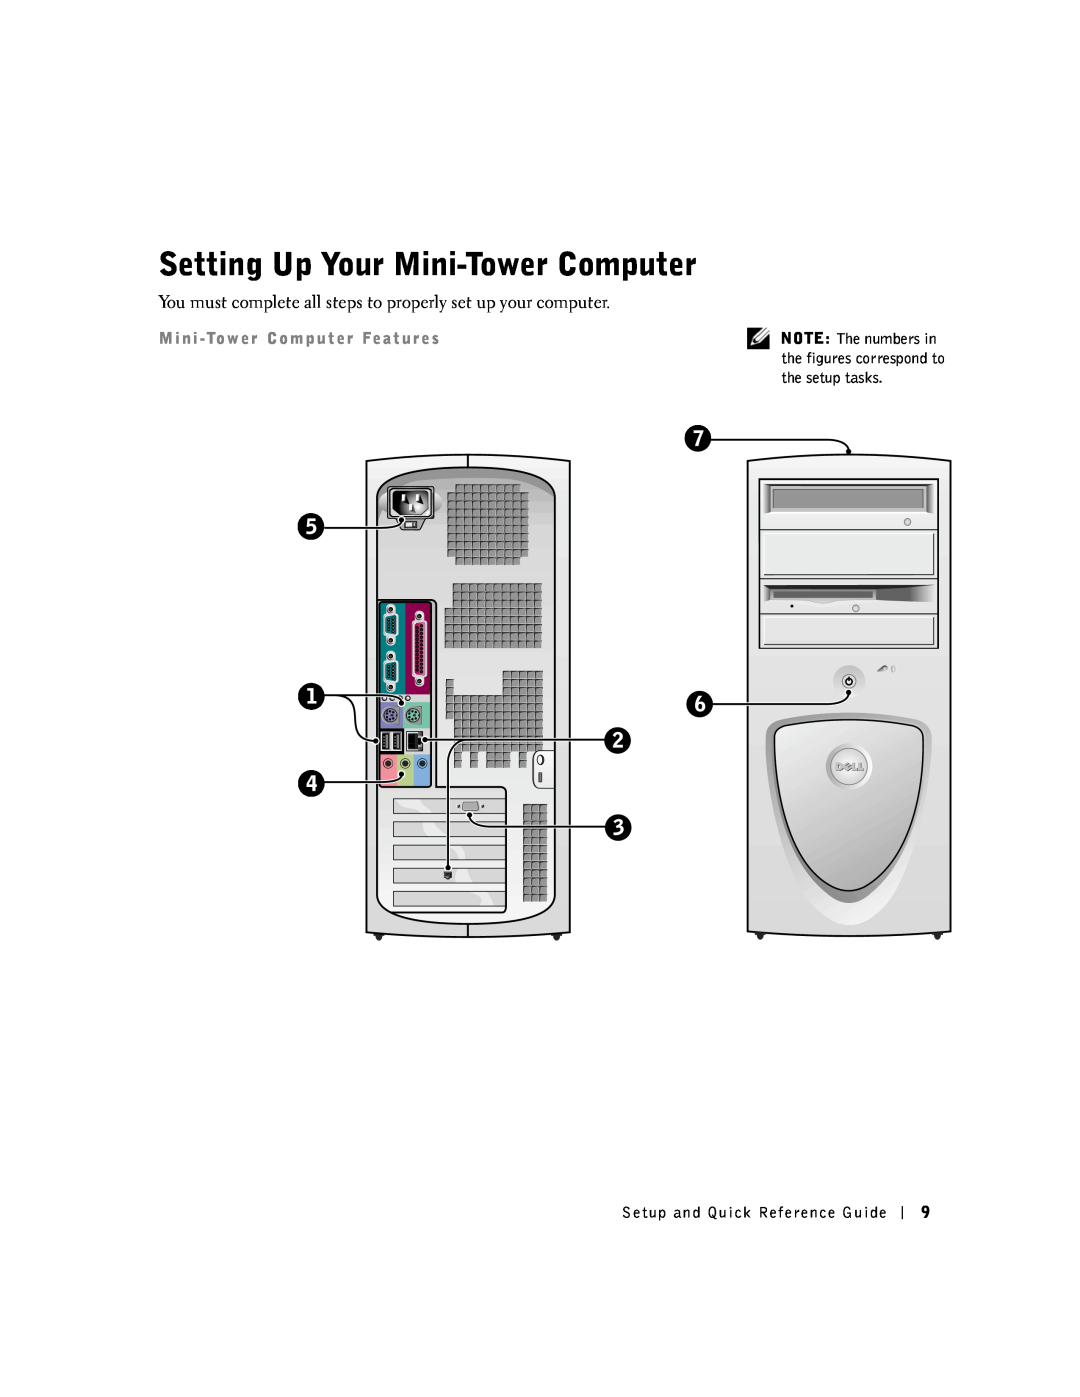 Dell 1G155 manual Setting Up Your Mini-Tower Computer, M i n i -To w e r C o m p u t e r Fe a t u r e s, the setup tasks 